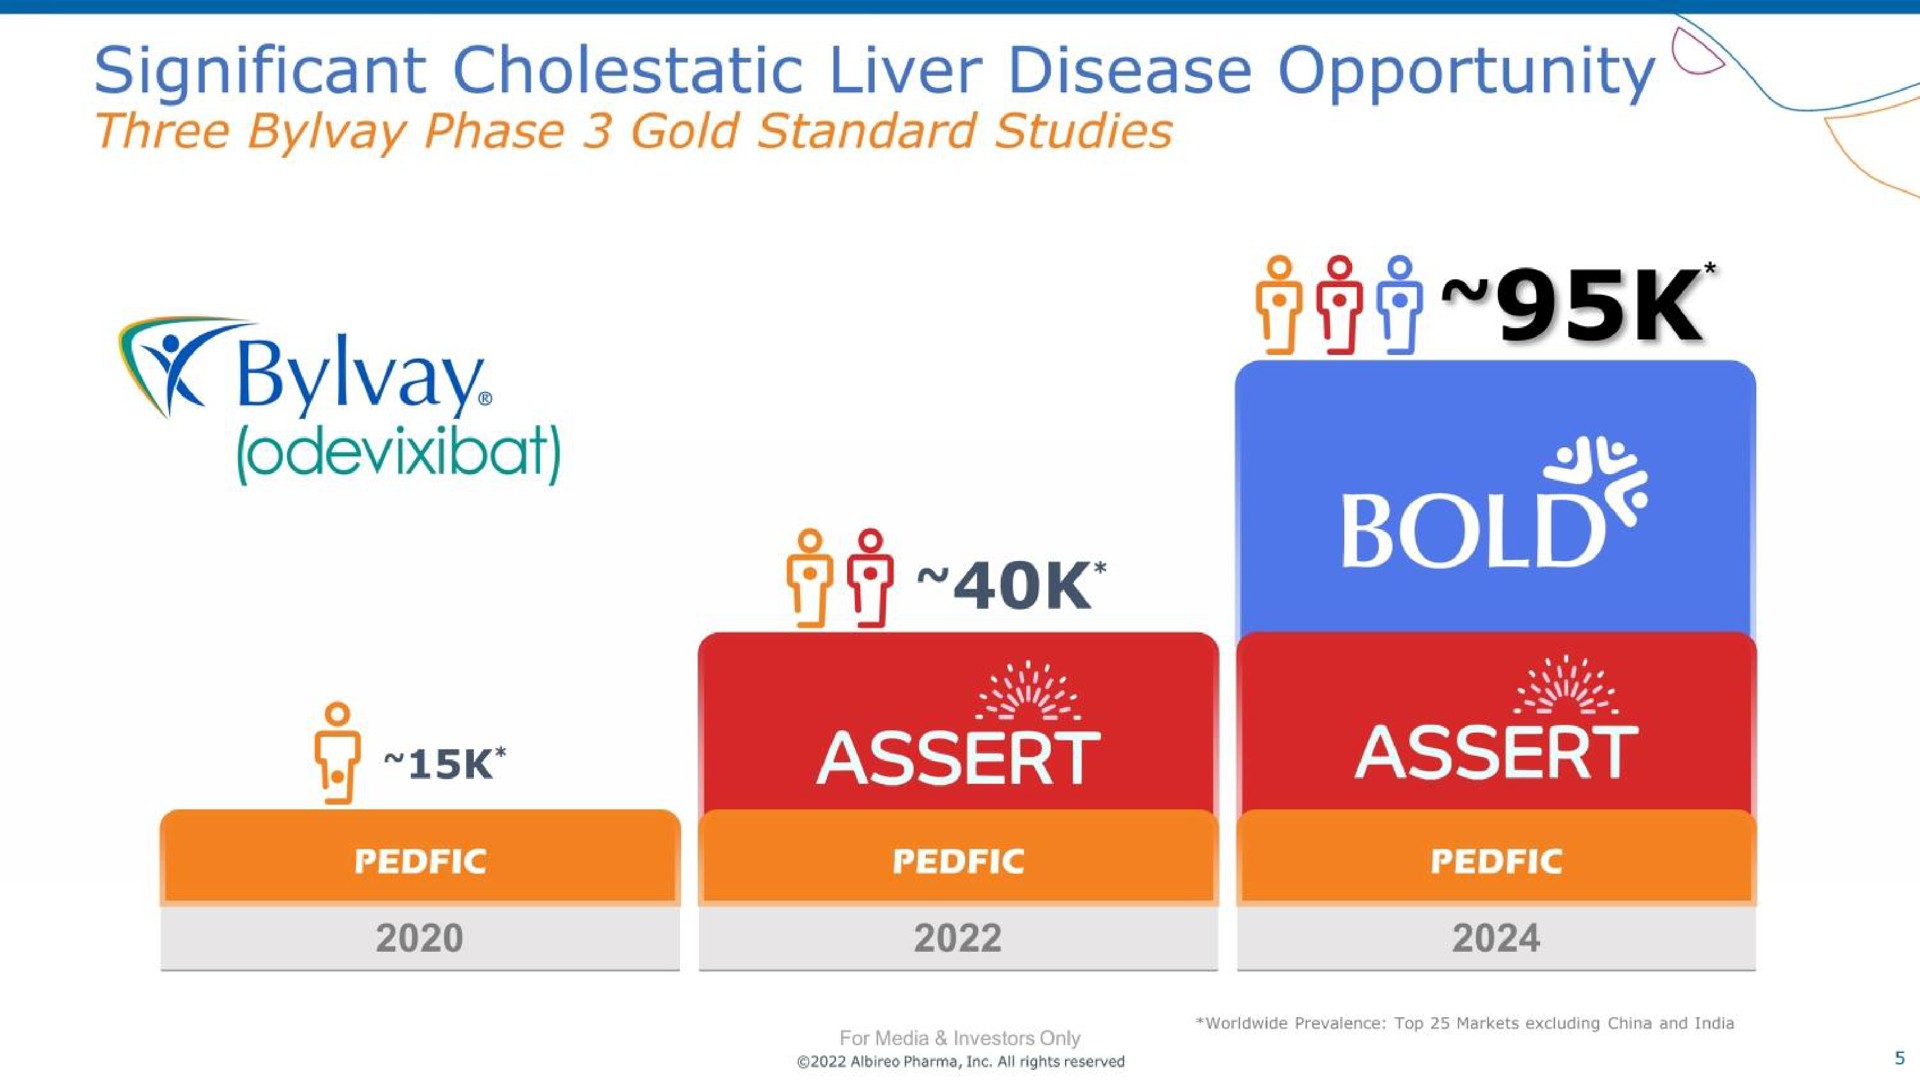 significant liver disease opportunity i bold a assert | Albireo Pharma